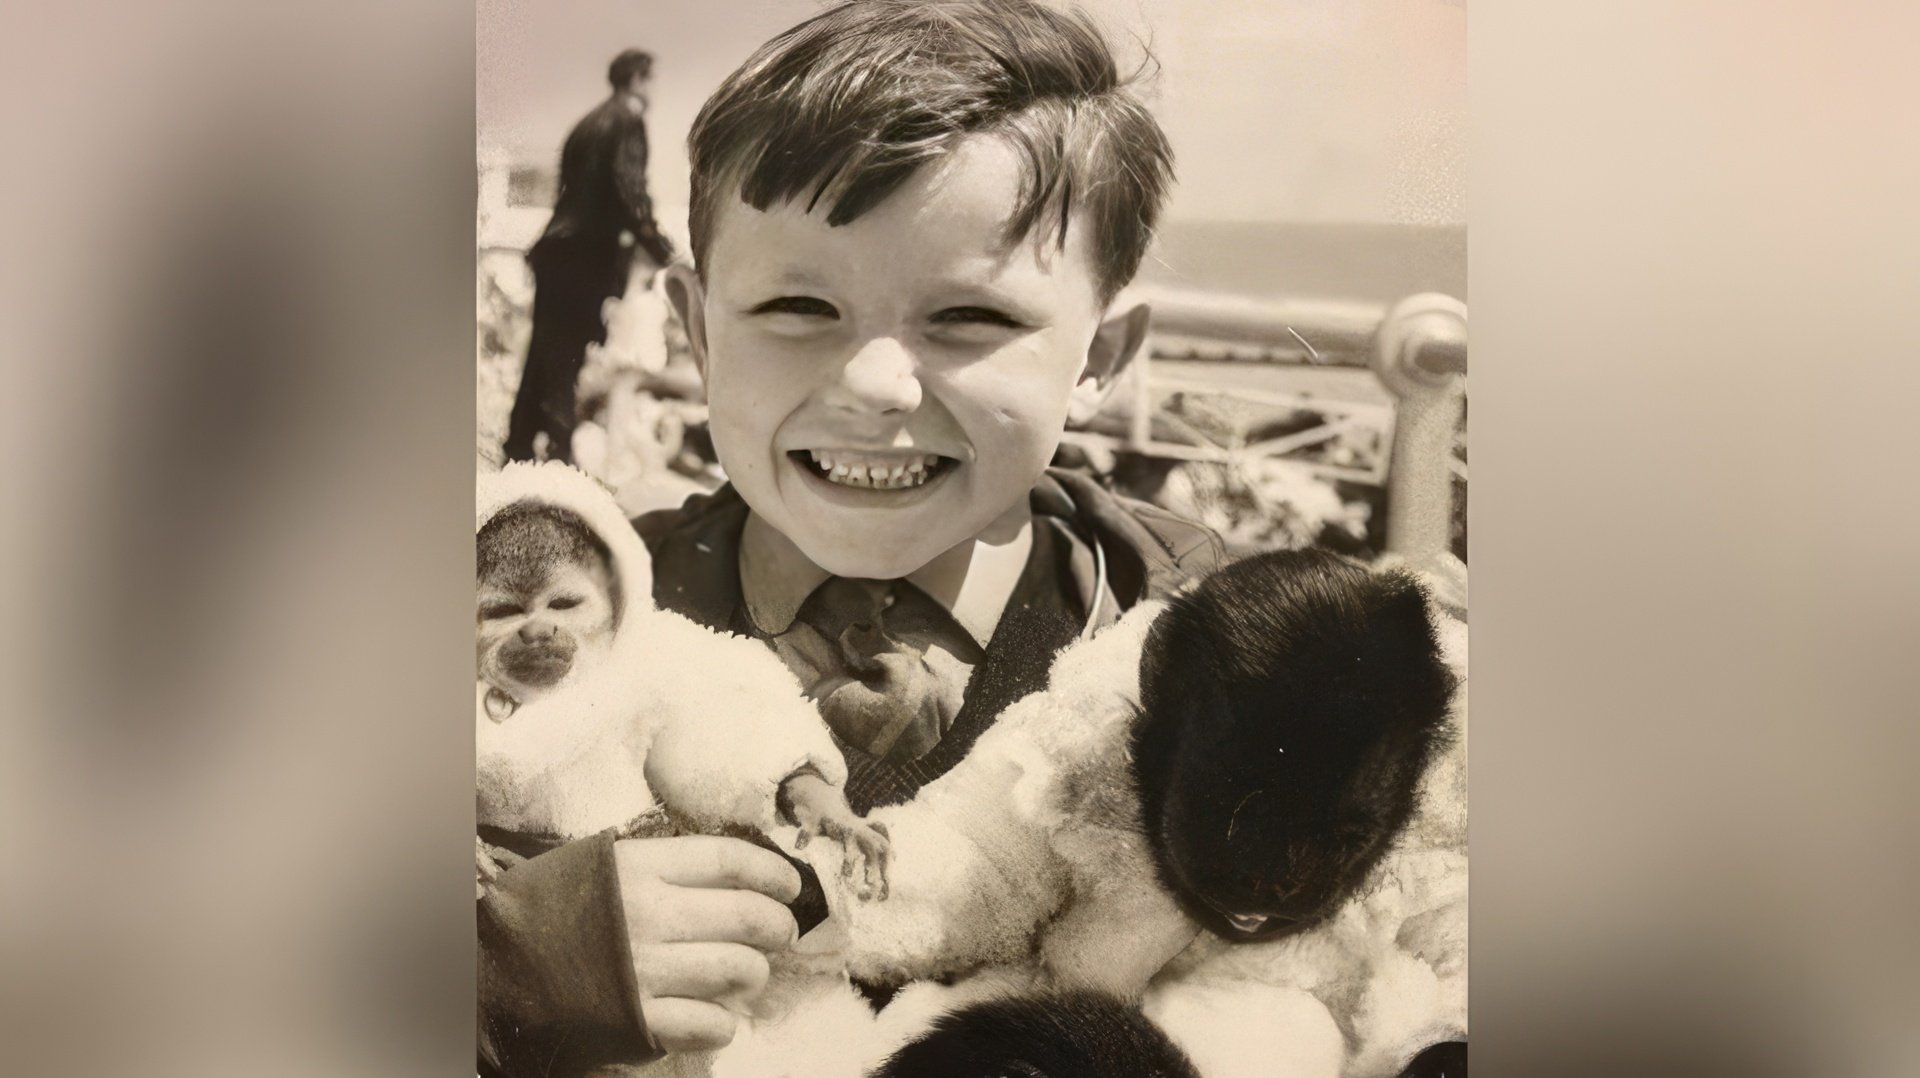 Childhood picture of Ricky Gervais